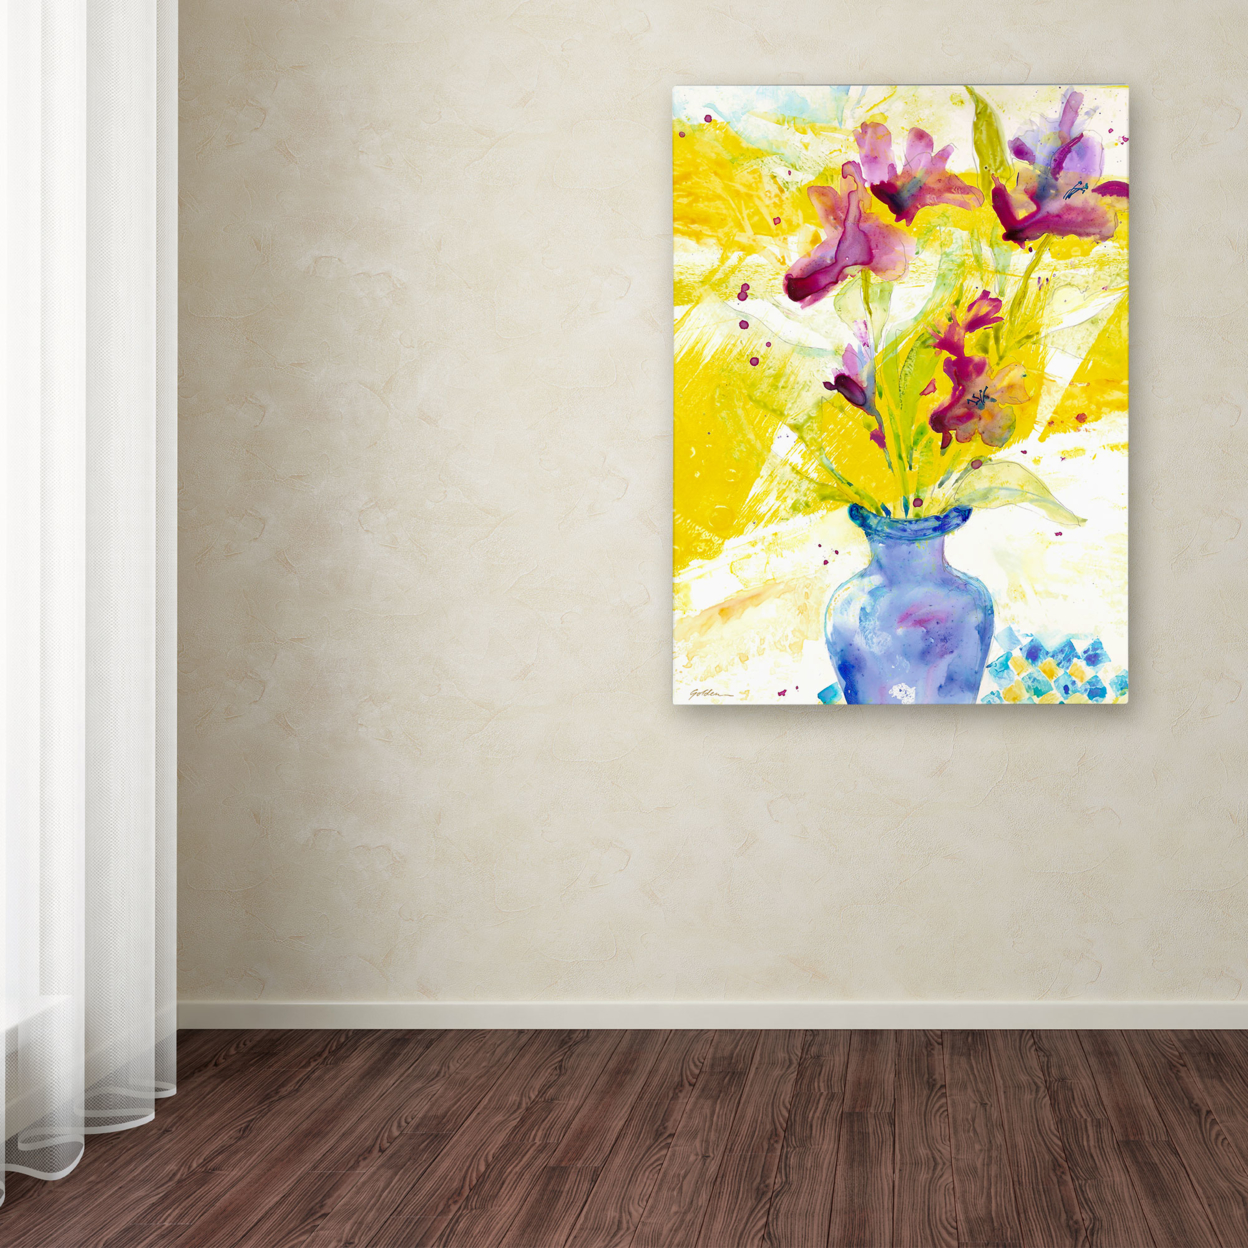 Sheila Golden 'Purple Blooms In Sunlight' Canvas Wall Art 35 X 47 Inches